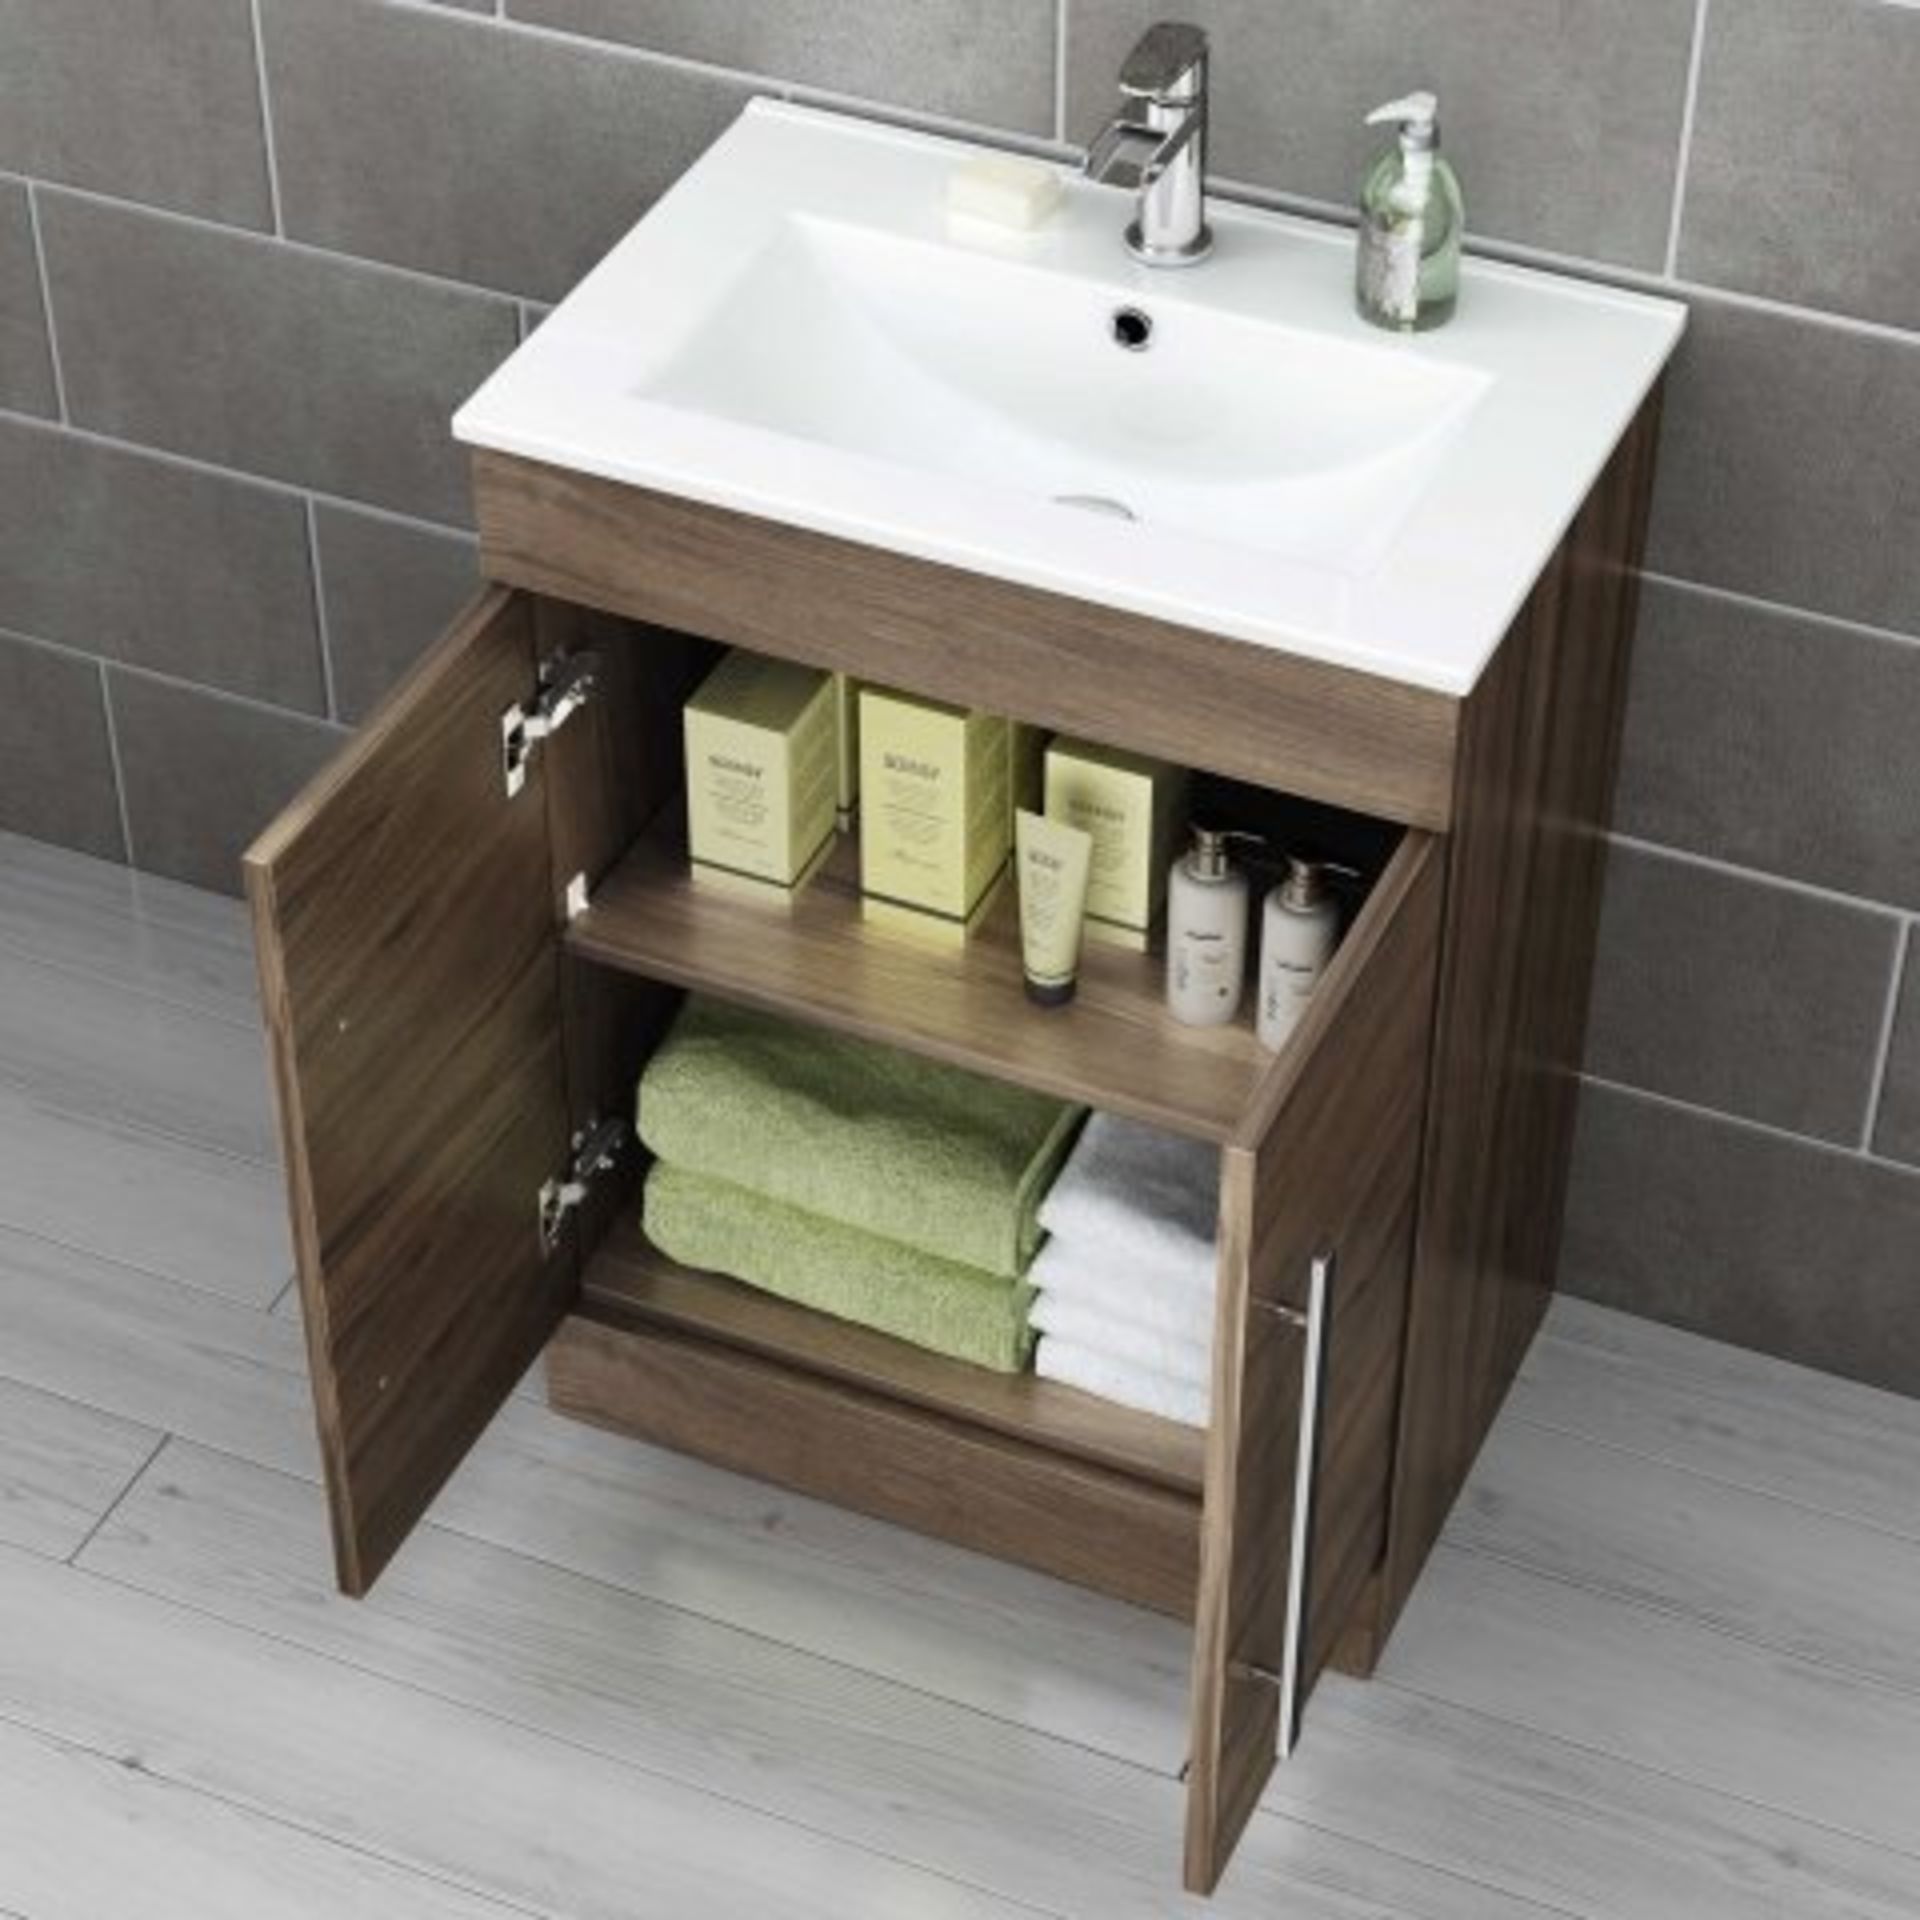 (O19) 600mm Avon Walnut Effect Basin Cabinet - Floor Standing. Complete with basin. Rectangular - Image 4 of 4